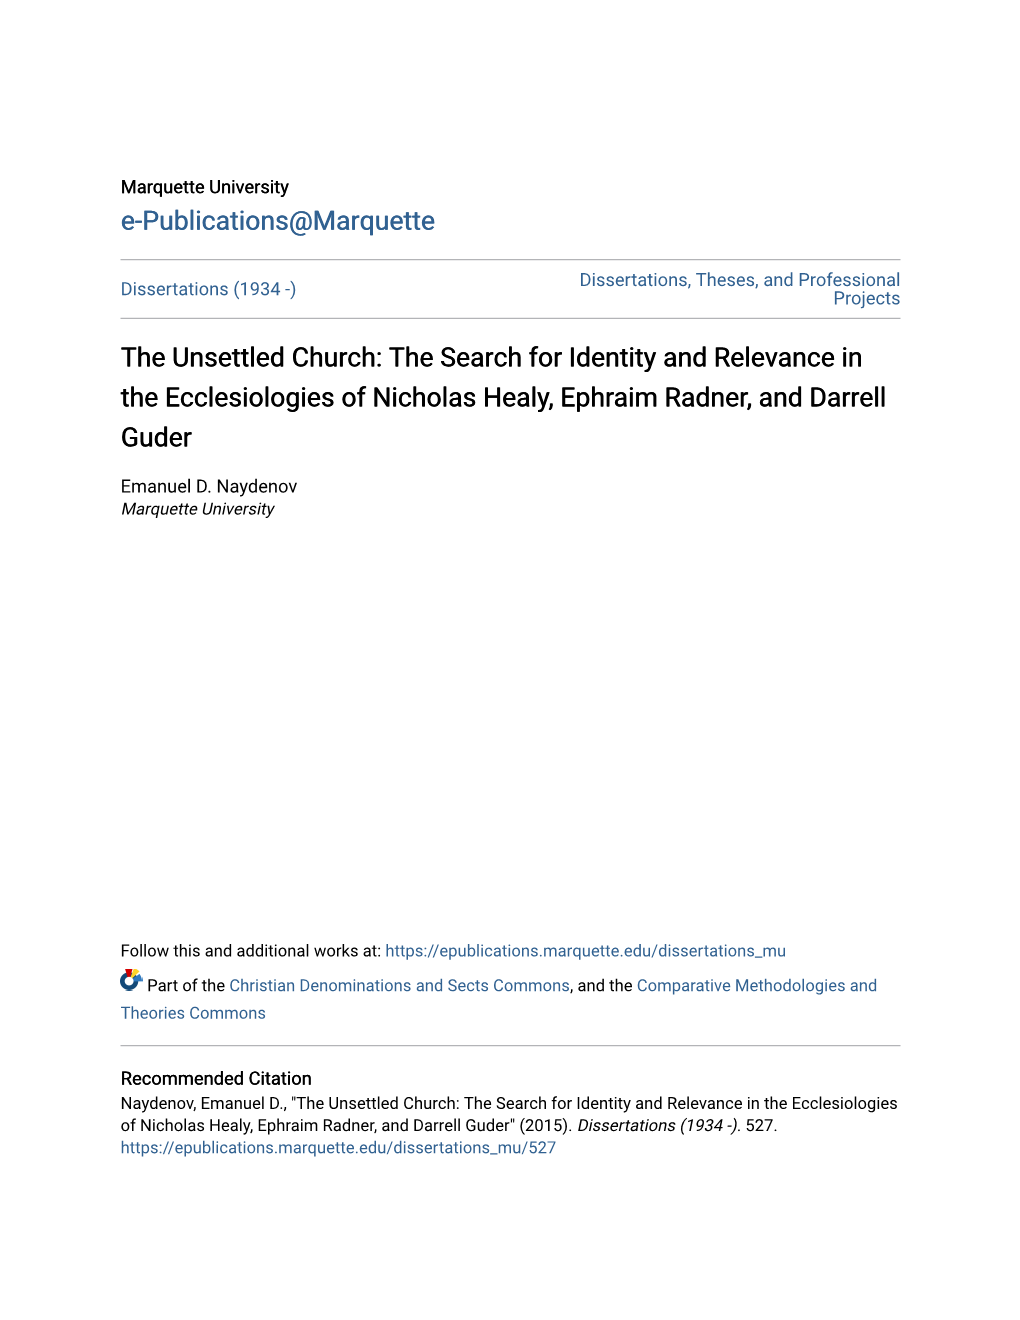 The Unsettled Church: the Search for Identity and Relevance in the Ecclesiologies of Nicholas Healy, Ephraim Radner, and Darrell Guder